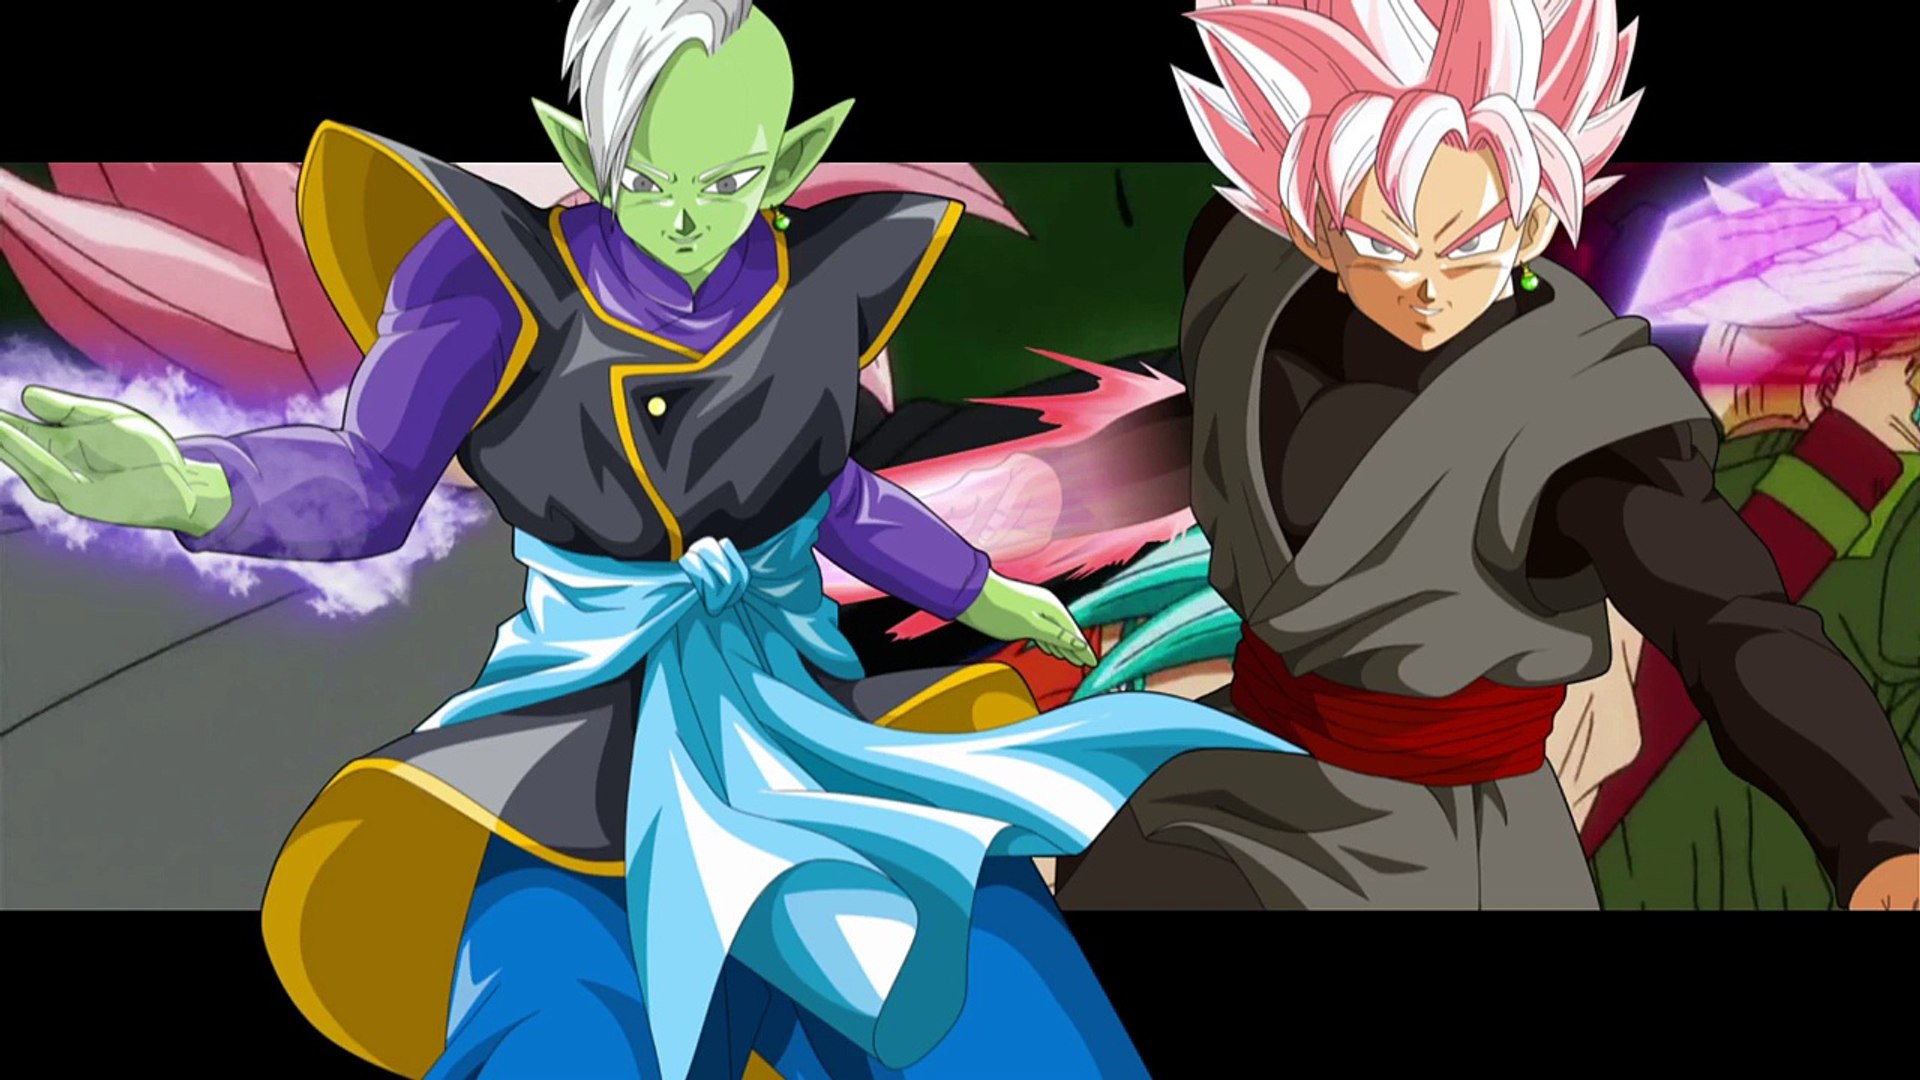 Dragon Ball Super Episode 60 Review: Who Is Black Goku?